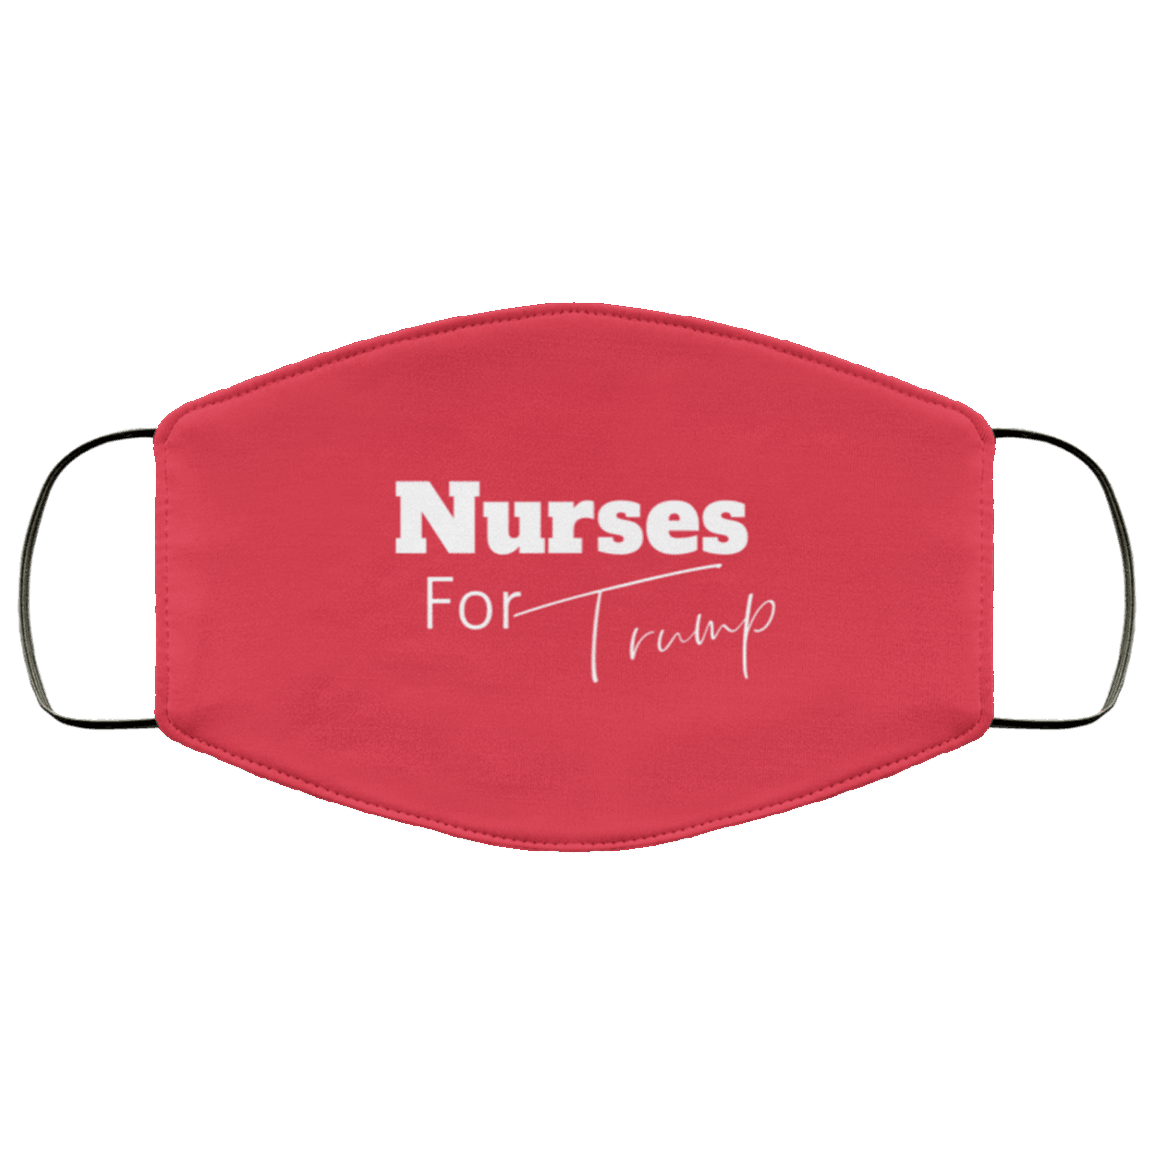 Designs by MyUtopia Shout Out:Nurses For Trump Adult Fabric Face Mask with Elastic Ear Loops,3 Layer Fabric Face Mask / Red / Adult,Fabric Face Mask